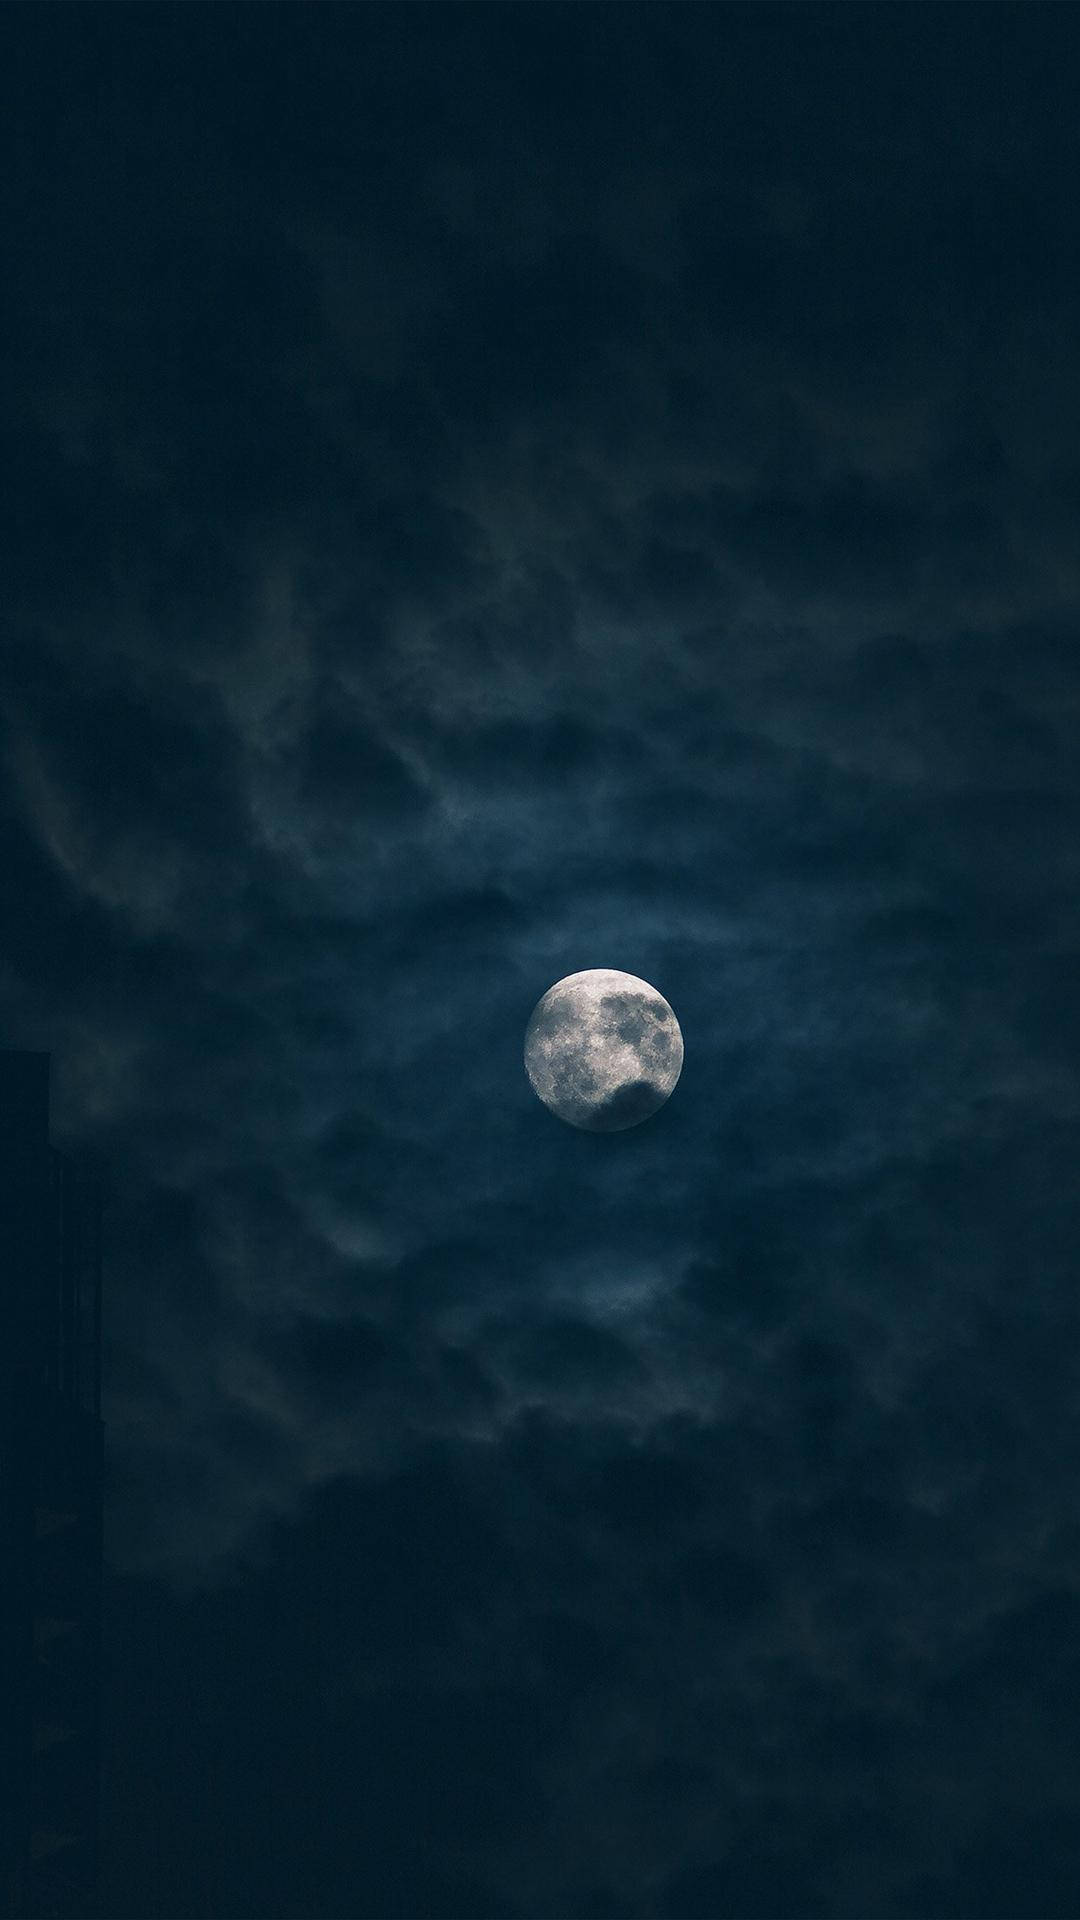 IPhone wallpaper of the moon in the sky - Moon